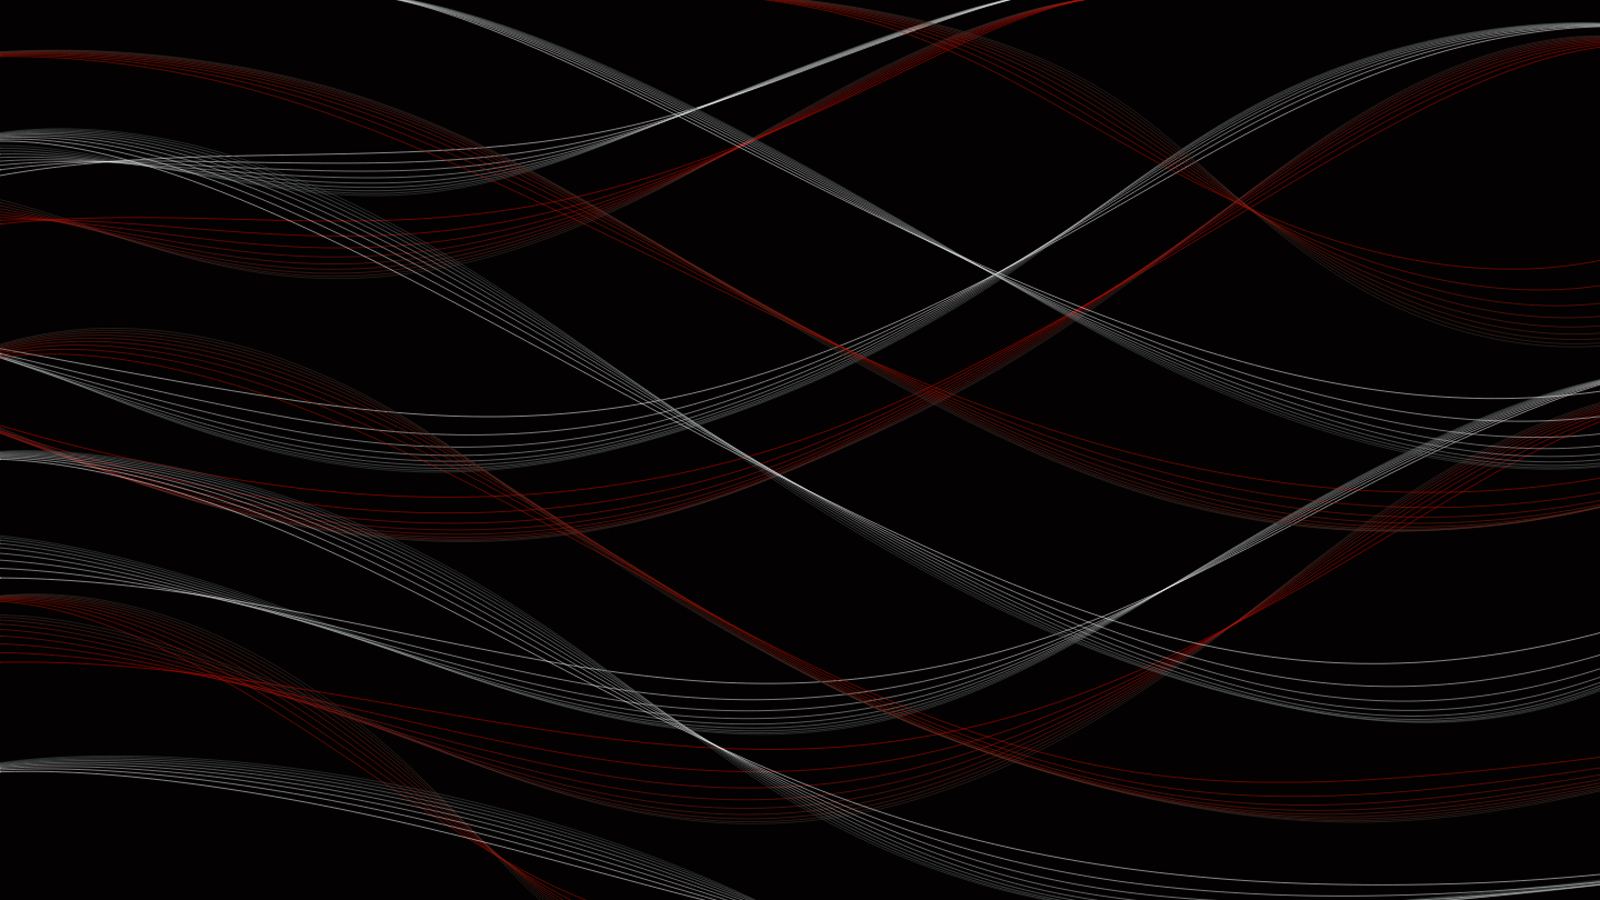 Black White And Red Backgrounds - Wallpapersafari